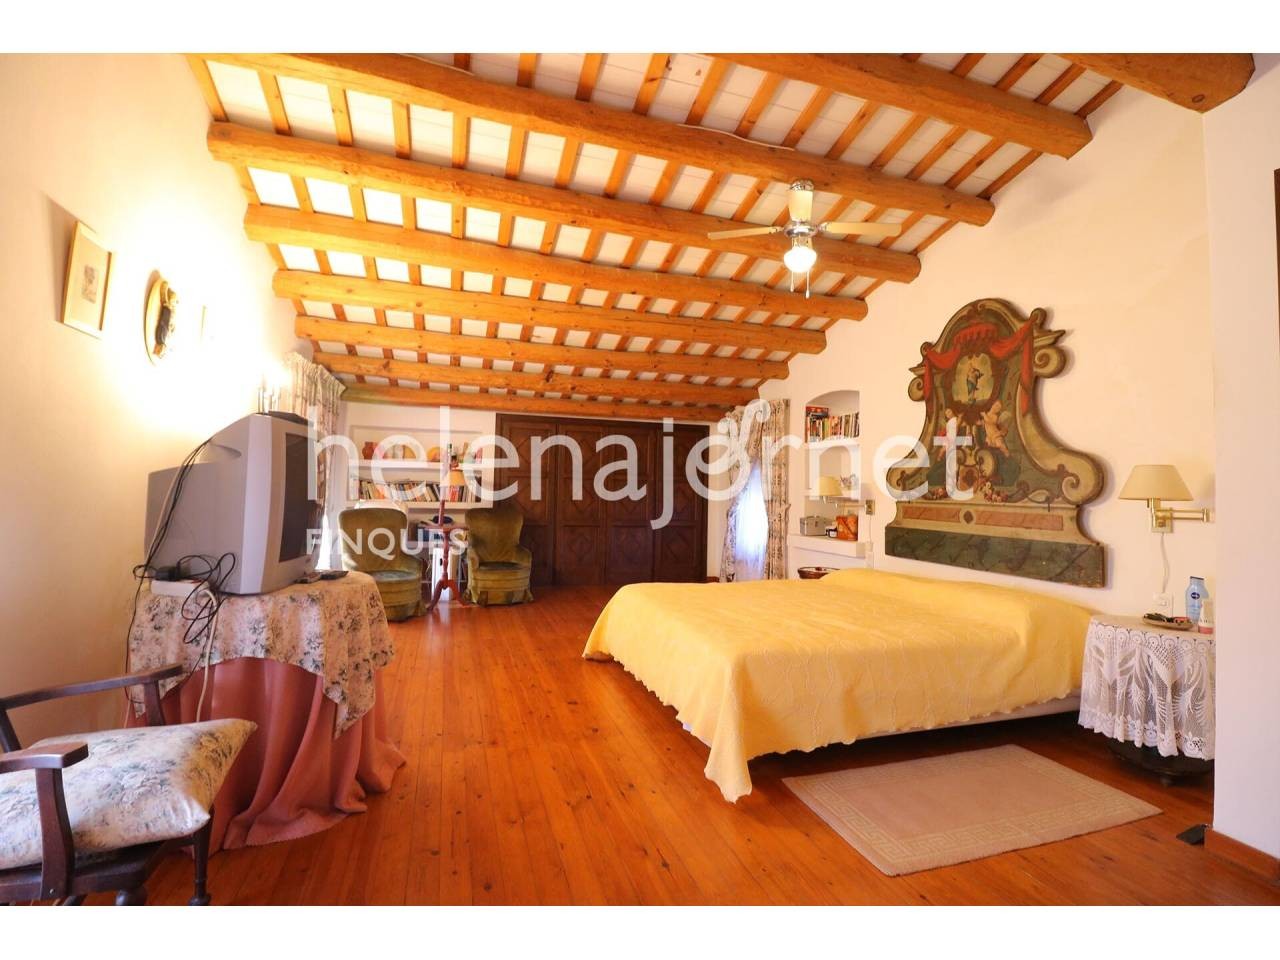 Excellent rustic estate with a renewed 563 m2 farmhouse and 4.8 hectares of land. - 2195